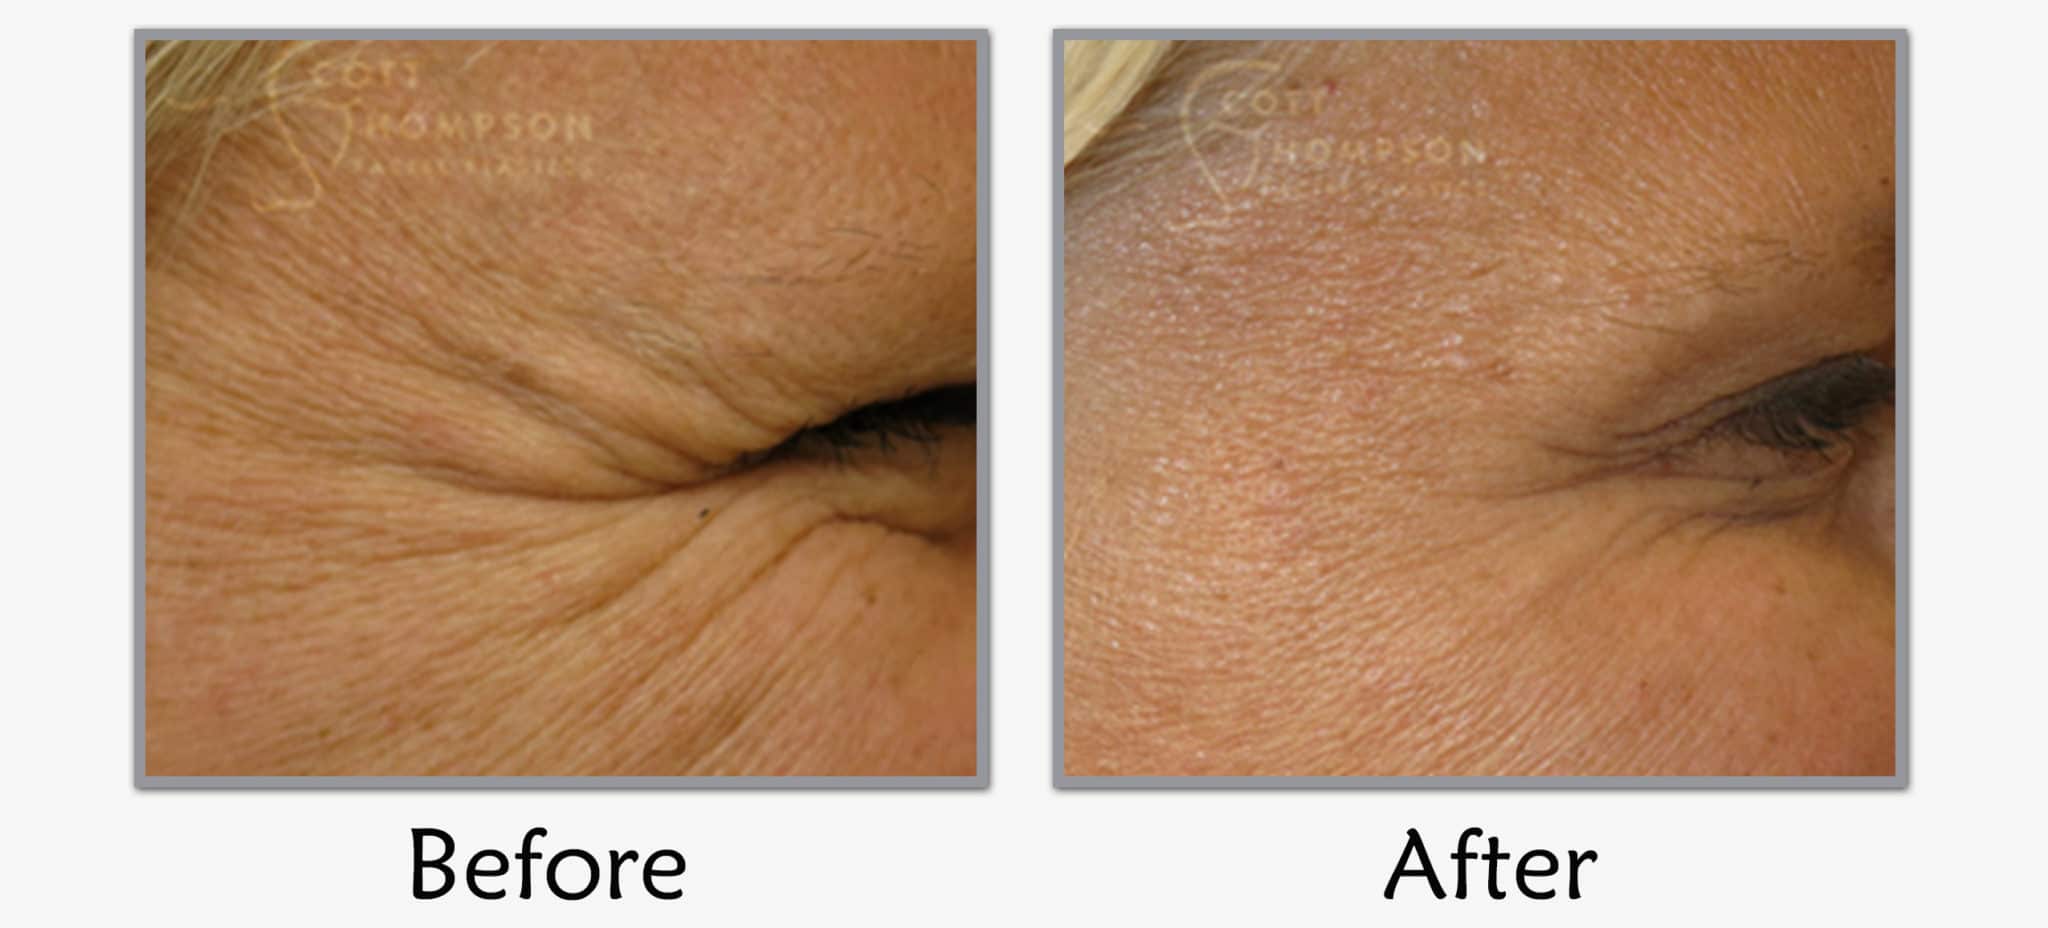 botox injections before and after utah facial plastics